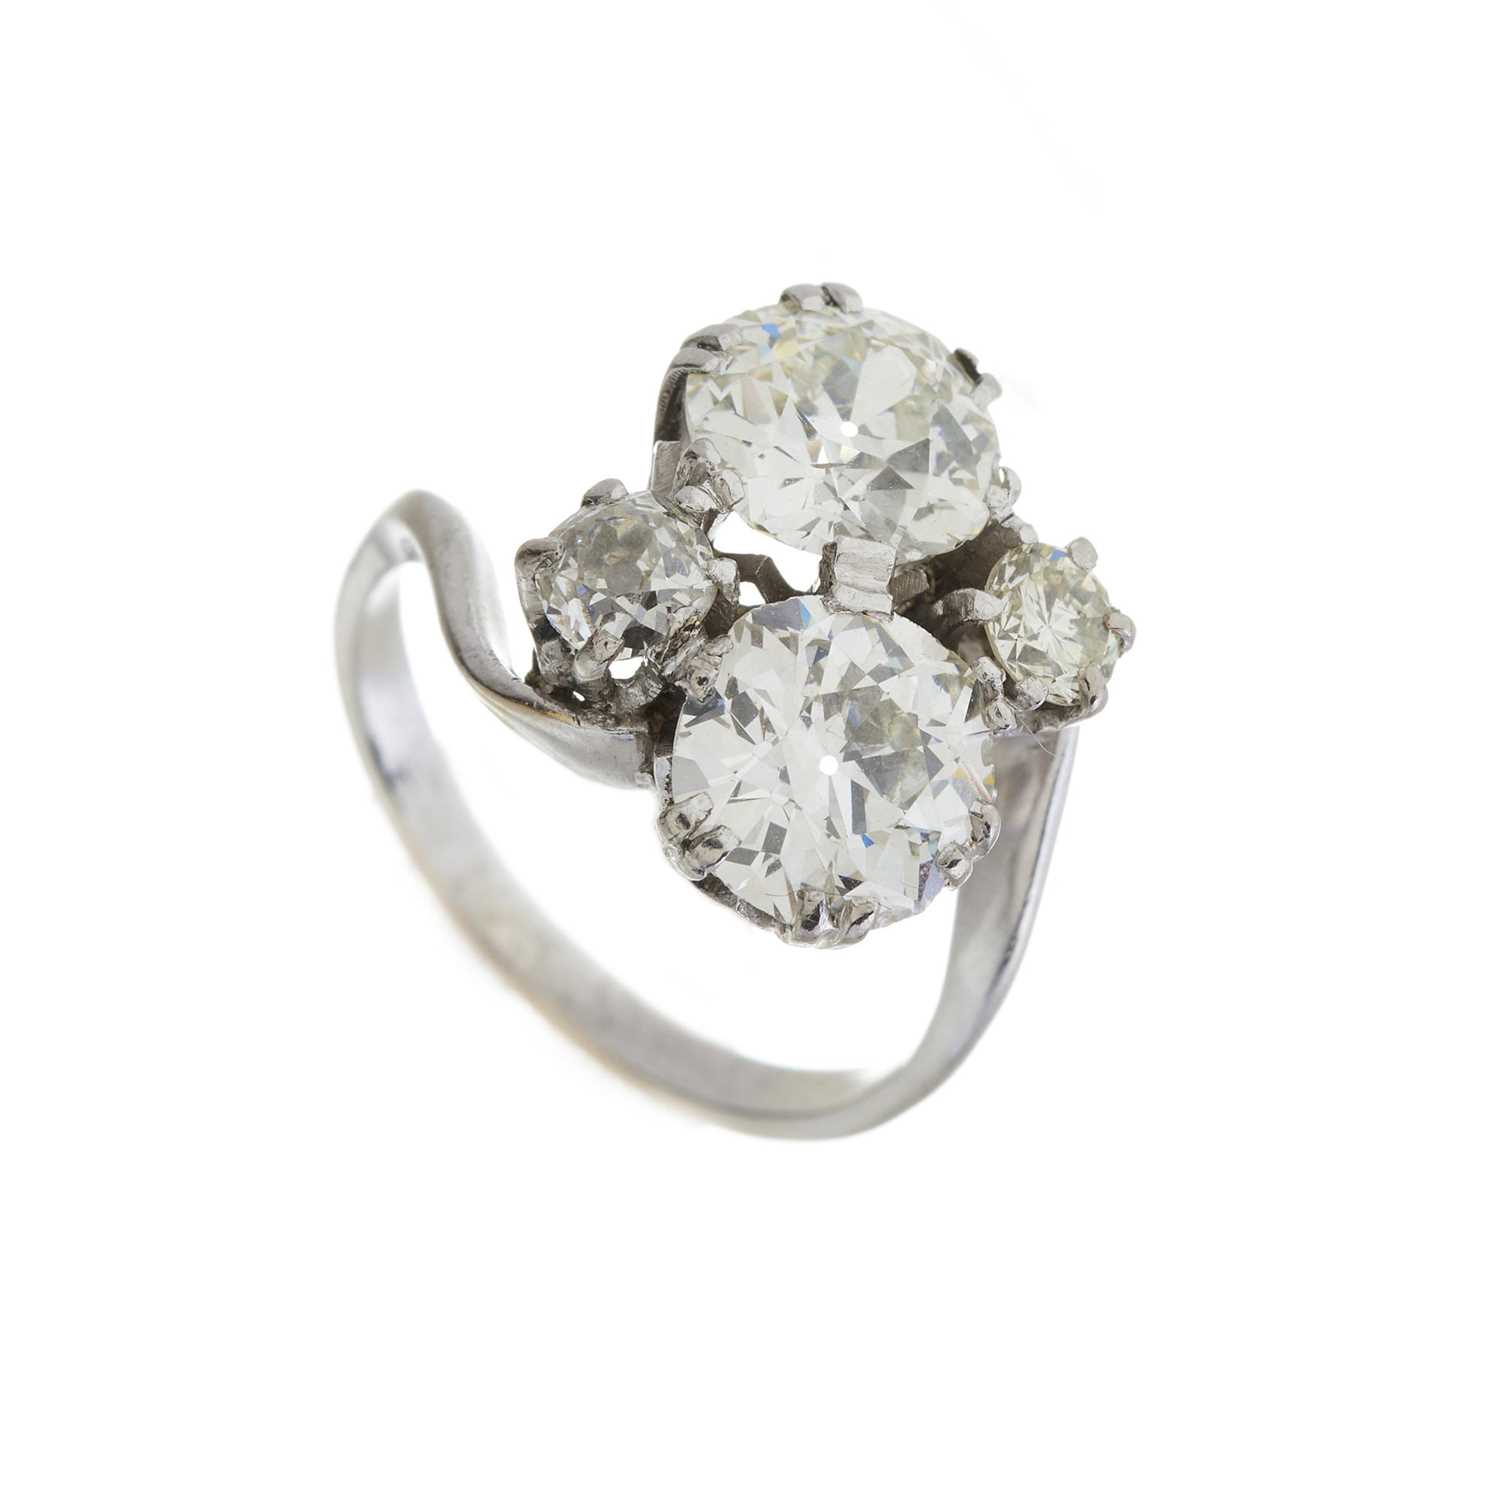 An early 20th century old-cut diamond crossover ring - Image 3 of 3